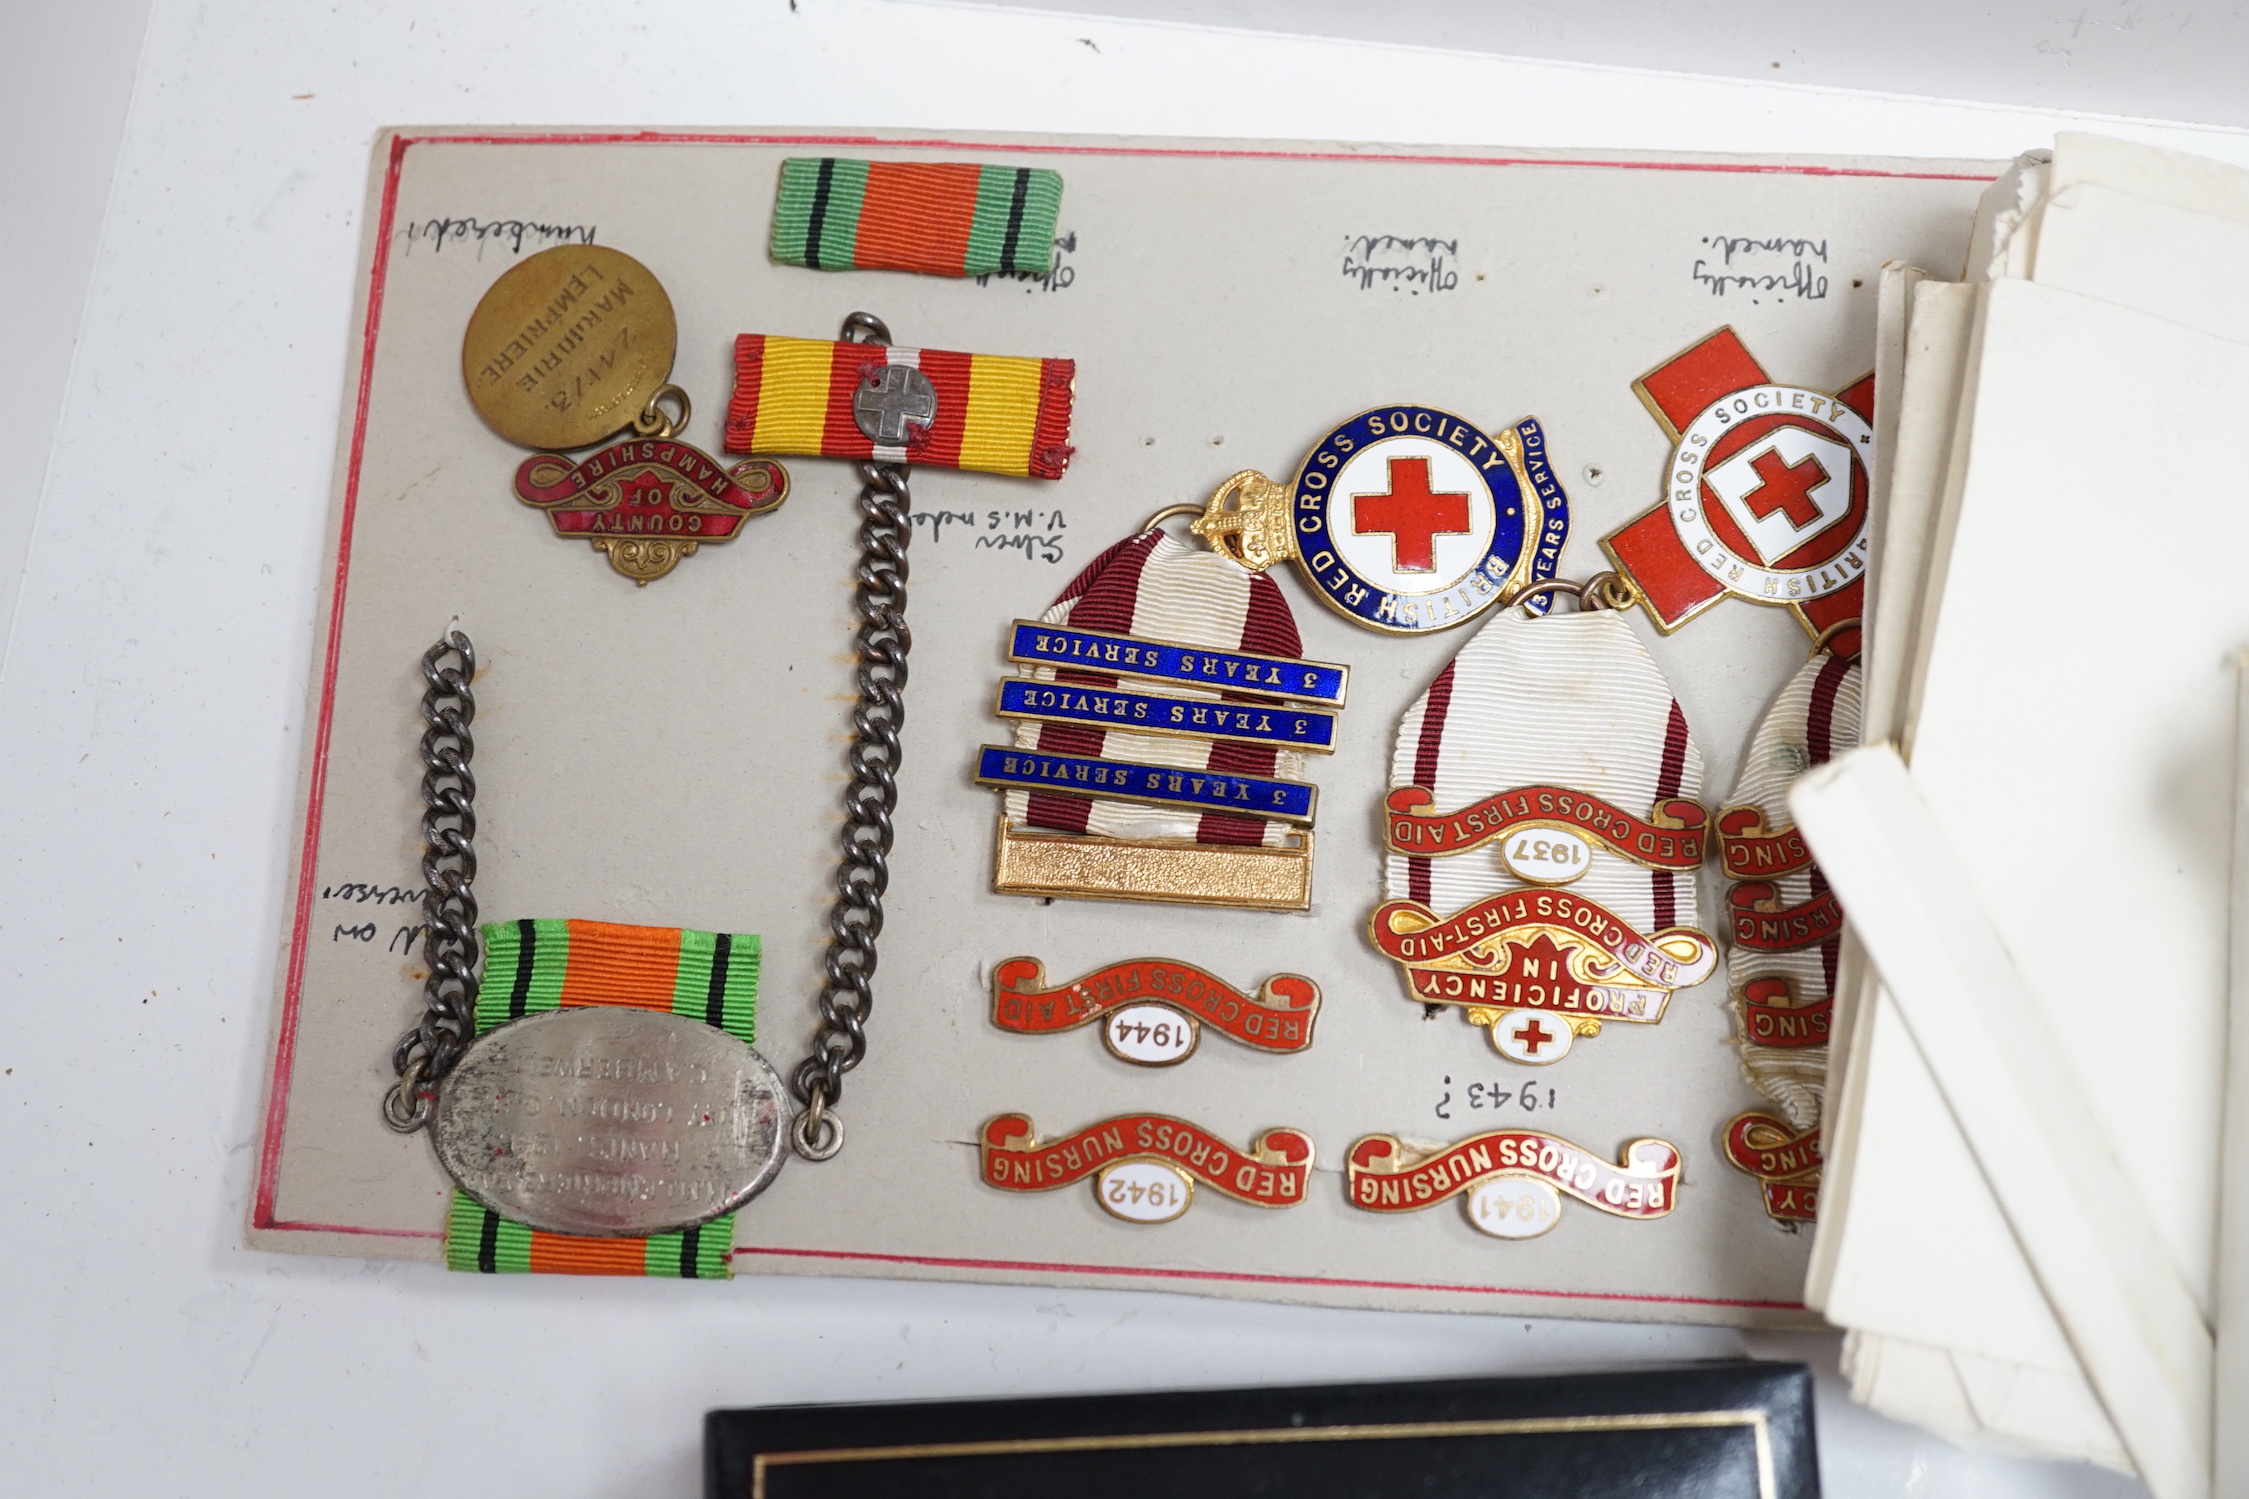 A collection of British Red Cross, medals, badges and memorabilia including a brass plaque, commemorating an auxiliary hospital during the Great War, proficiency, medals, long, service, medals, metal boxes, and some pape